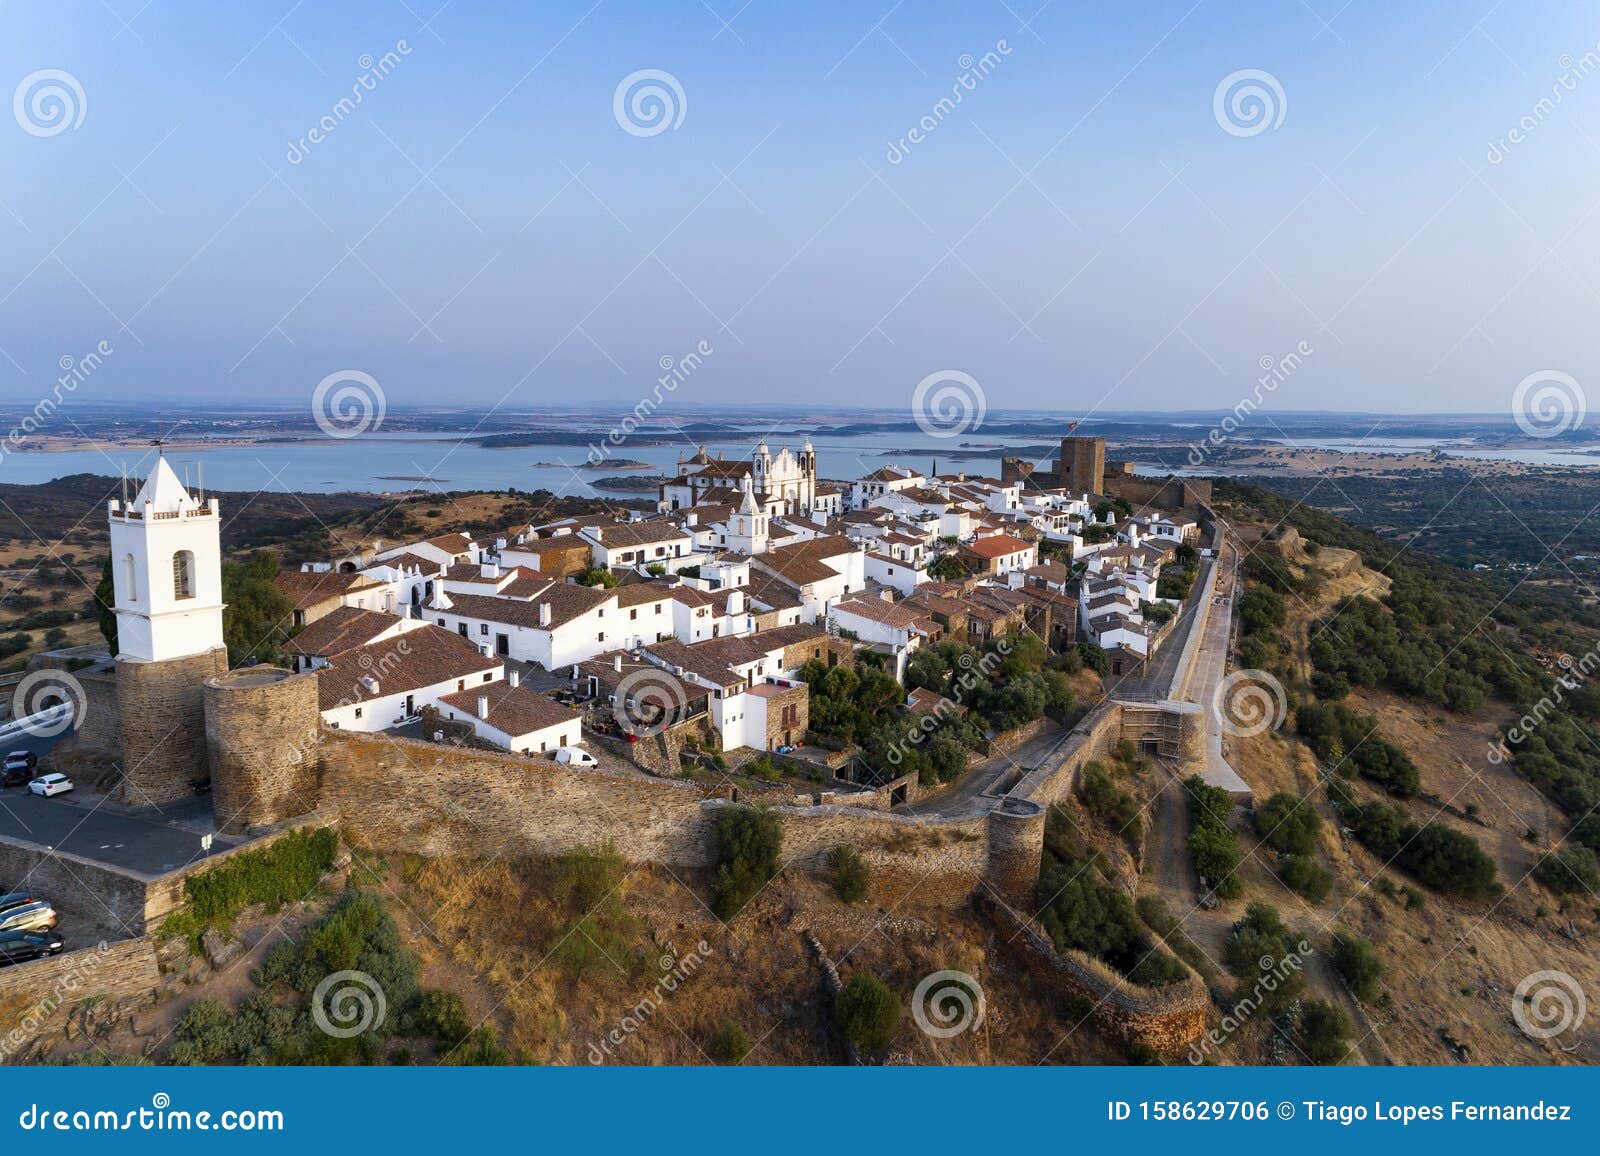 aerial view of the beutiful historical village of monsaraz, in alentejo, portugal